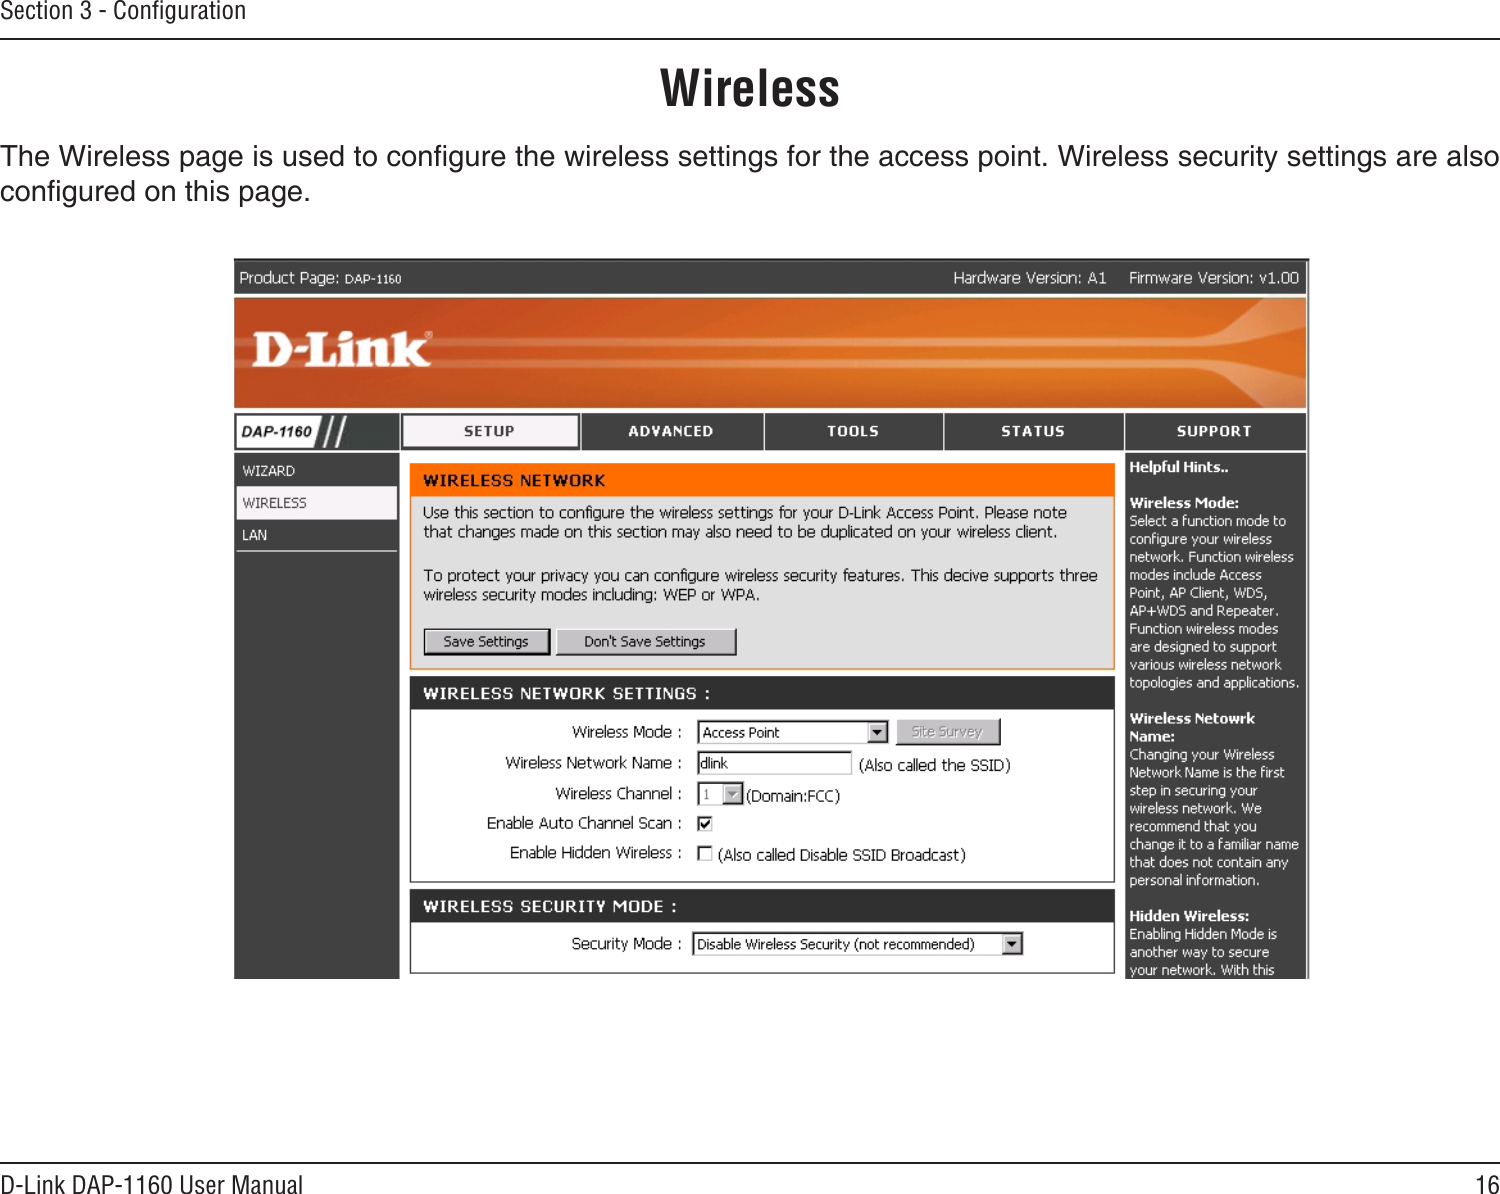 16D-Link DAP-1160 User ManualSection 3 - ConﬁgurationWirelessThe Wireless page is used to congure the wireless settings for the access point. Wireless security settings are also congured on this page.